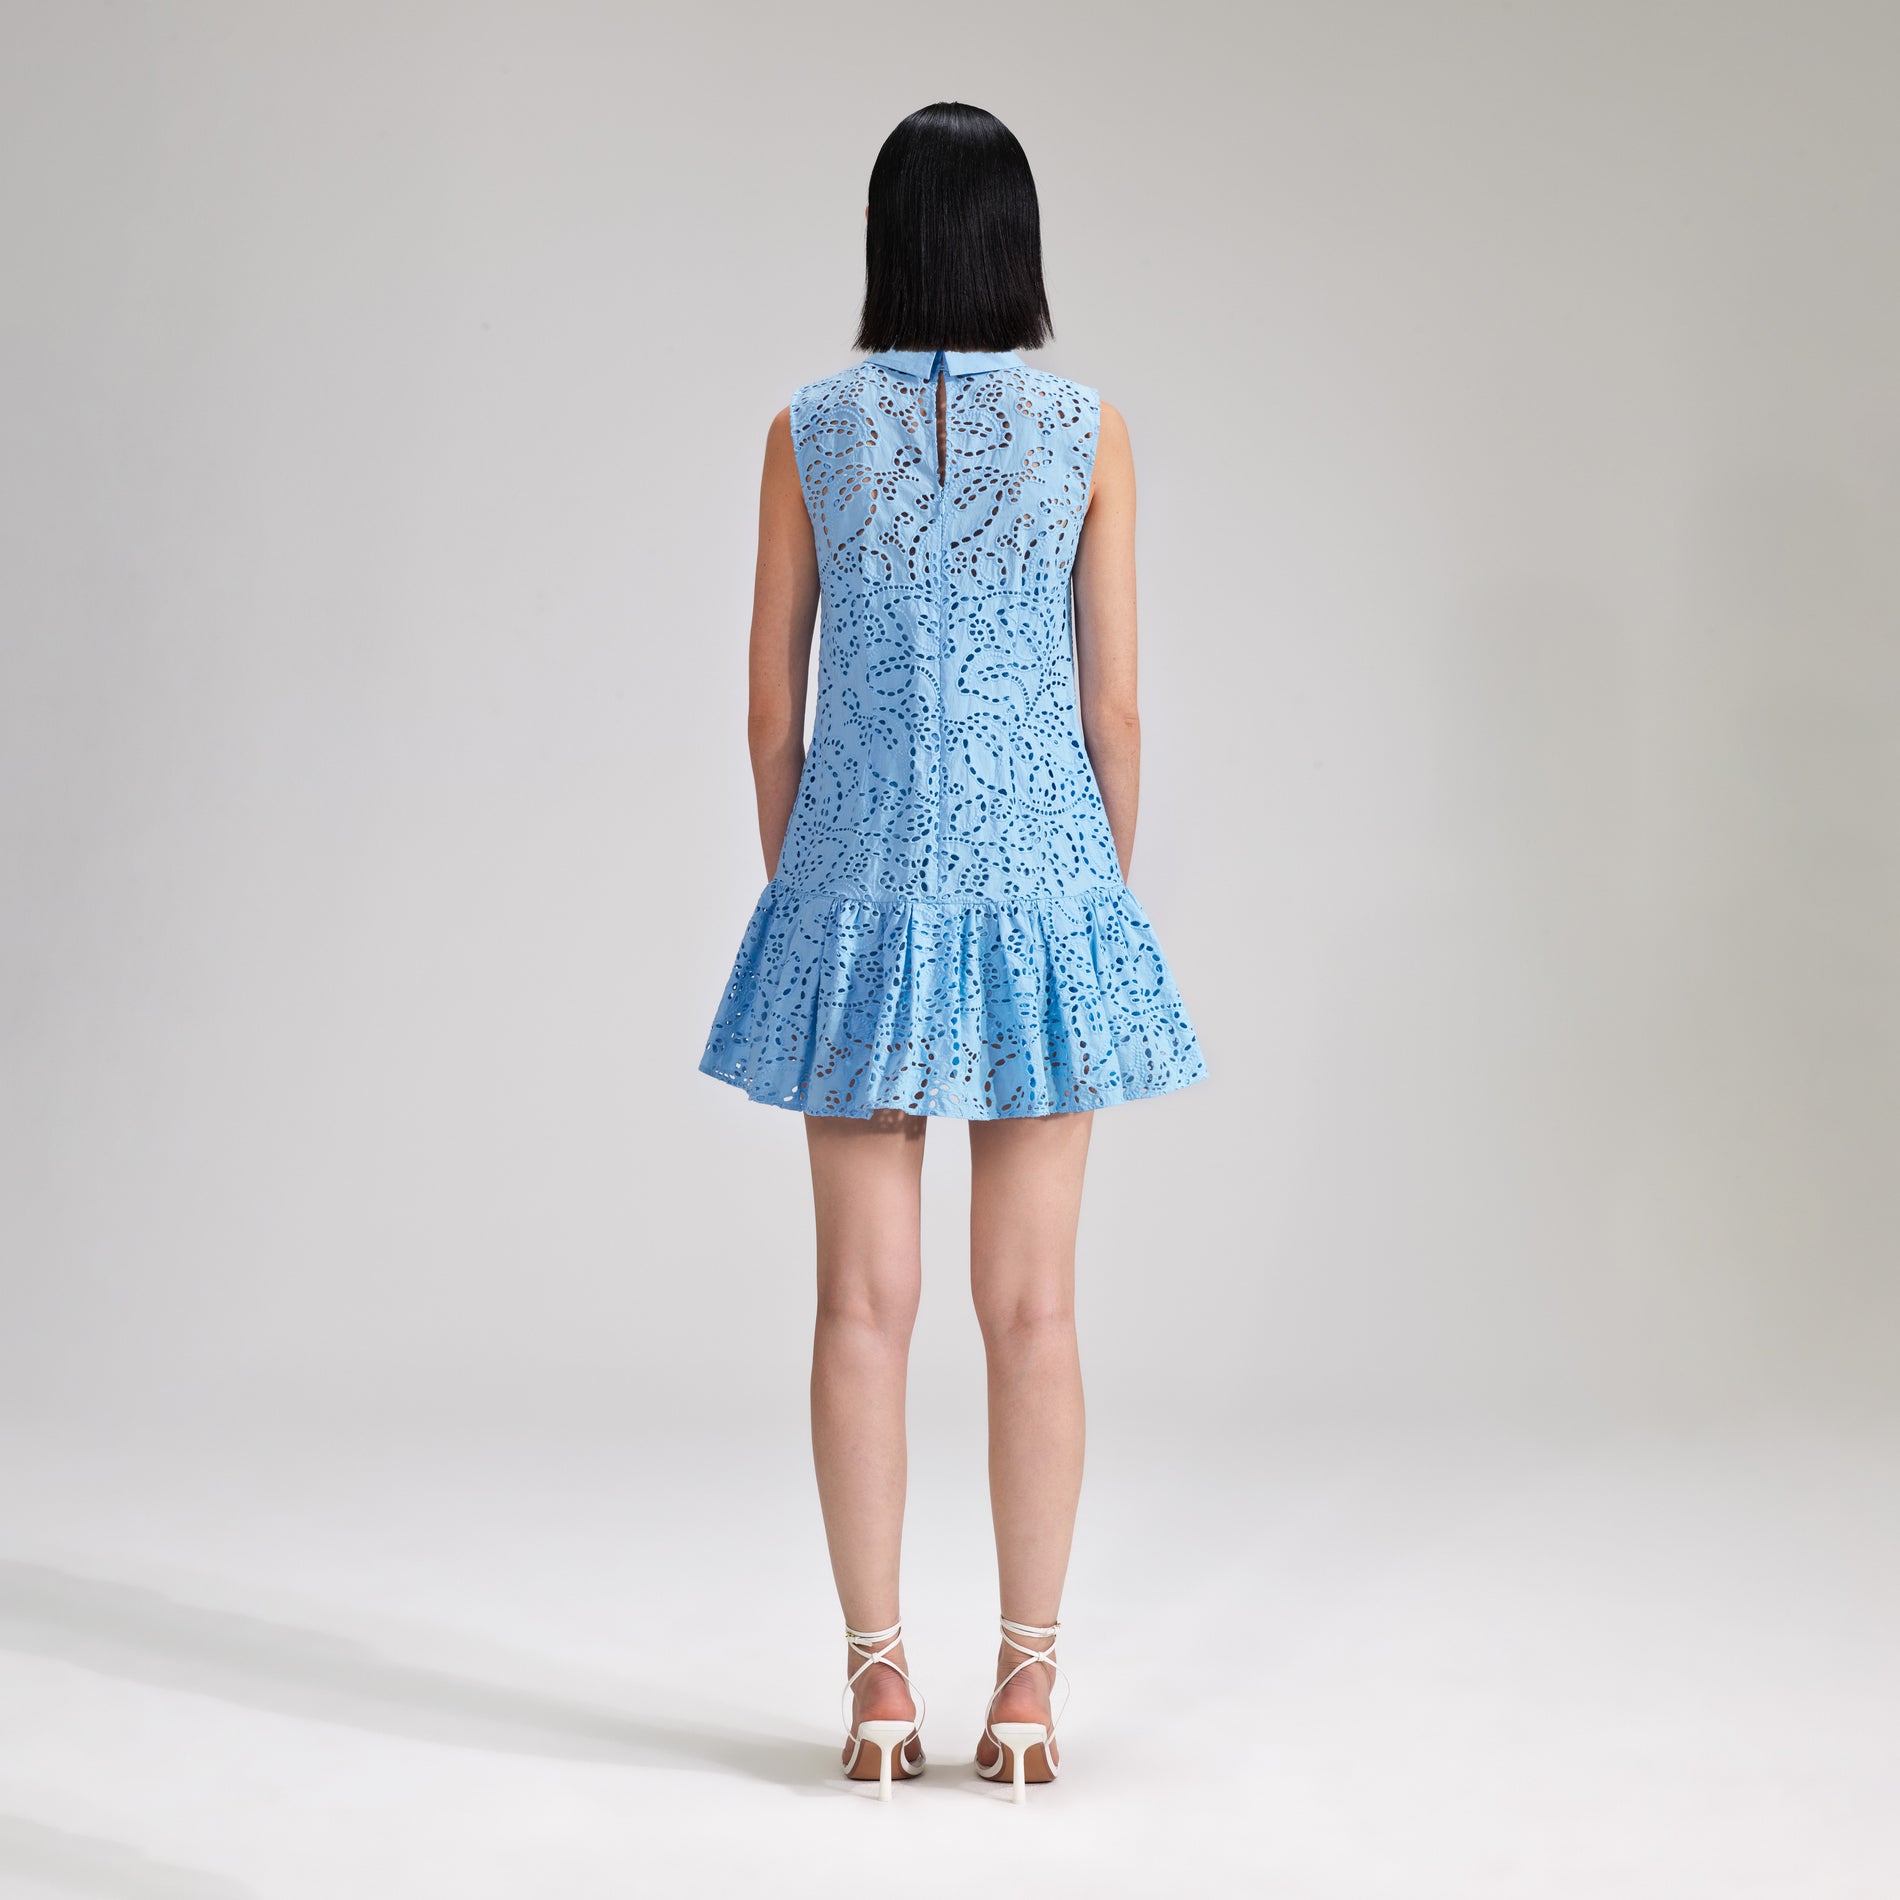 A woman wearing the Blue Broderie Mini Dress